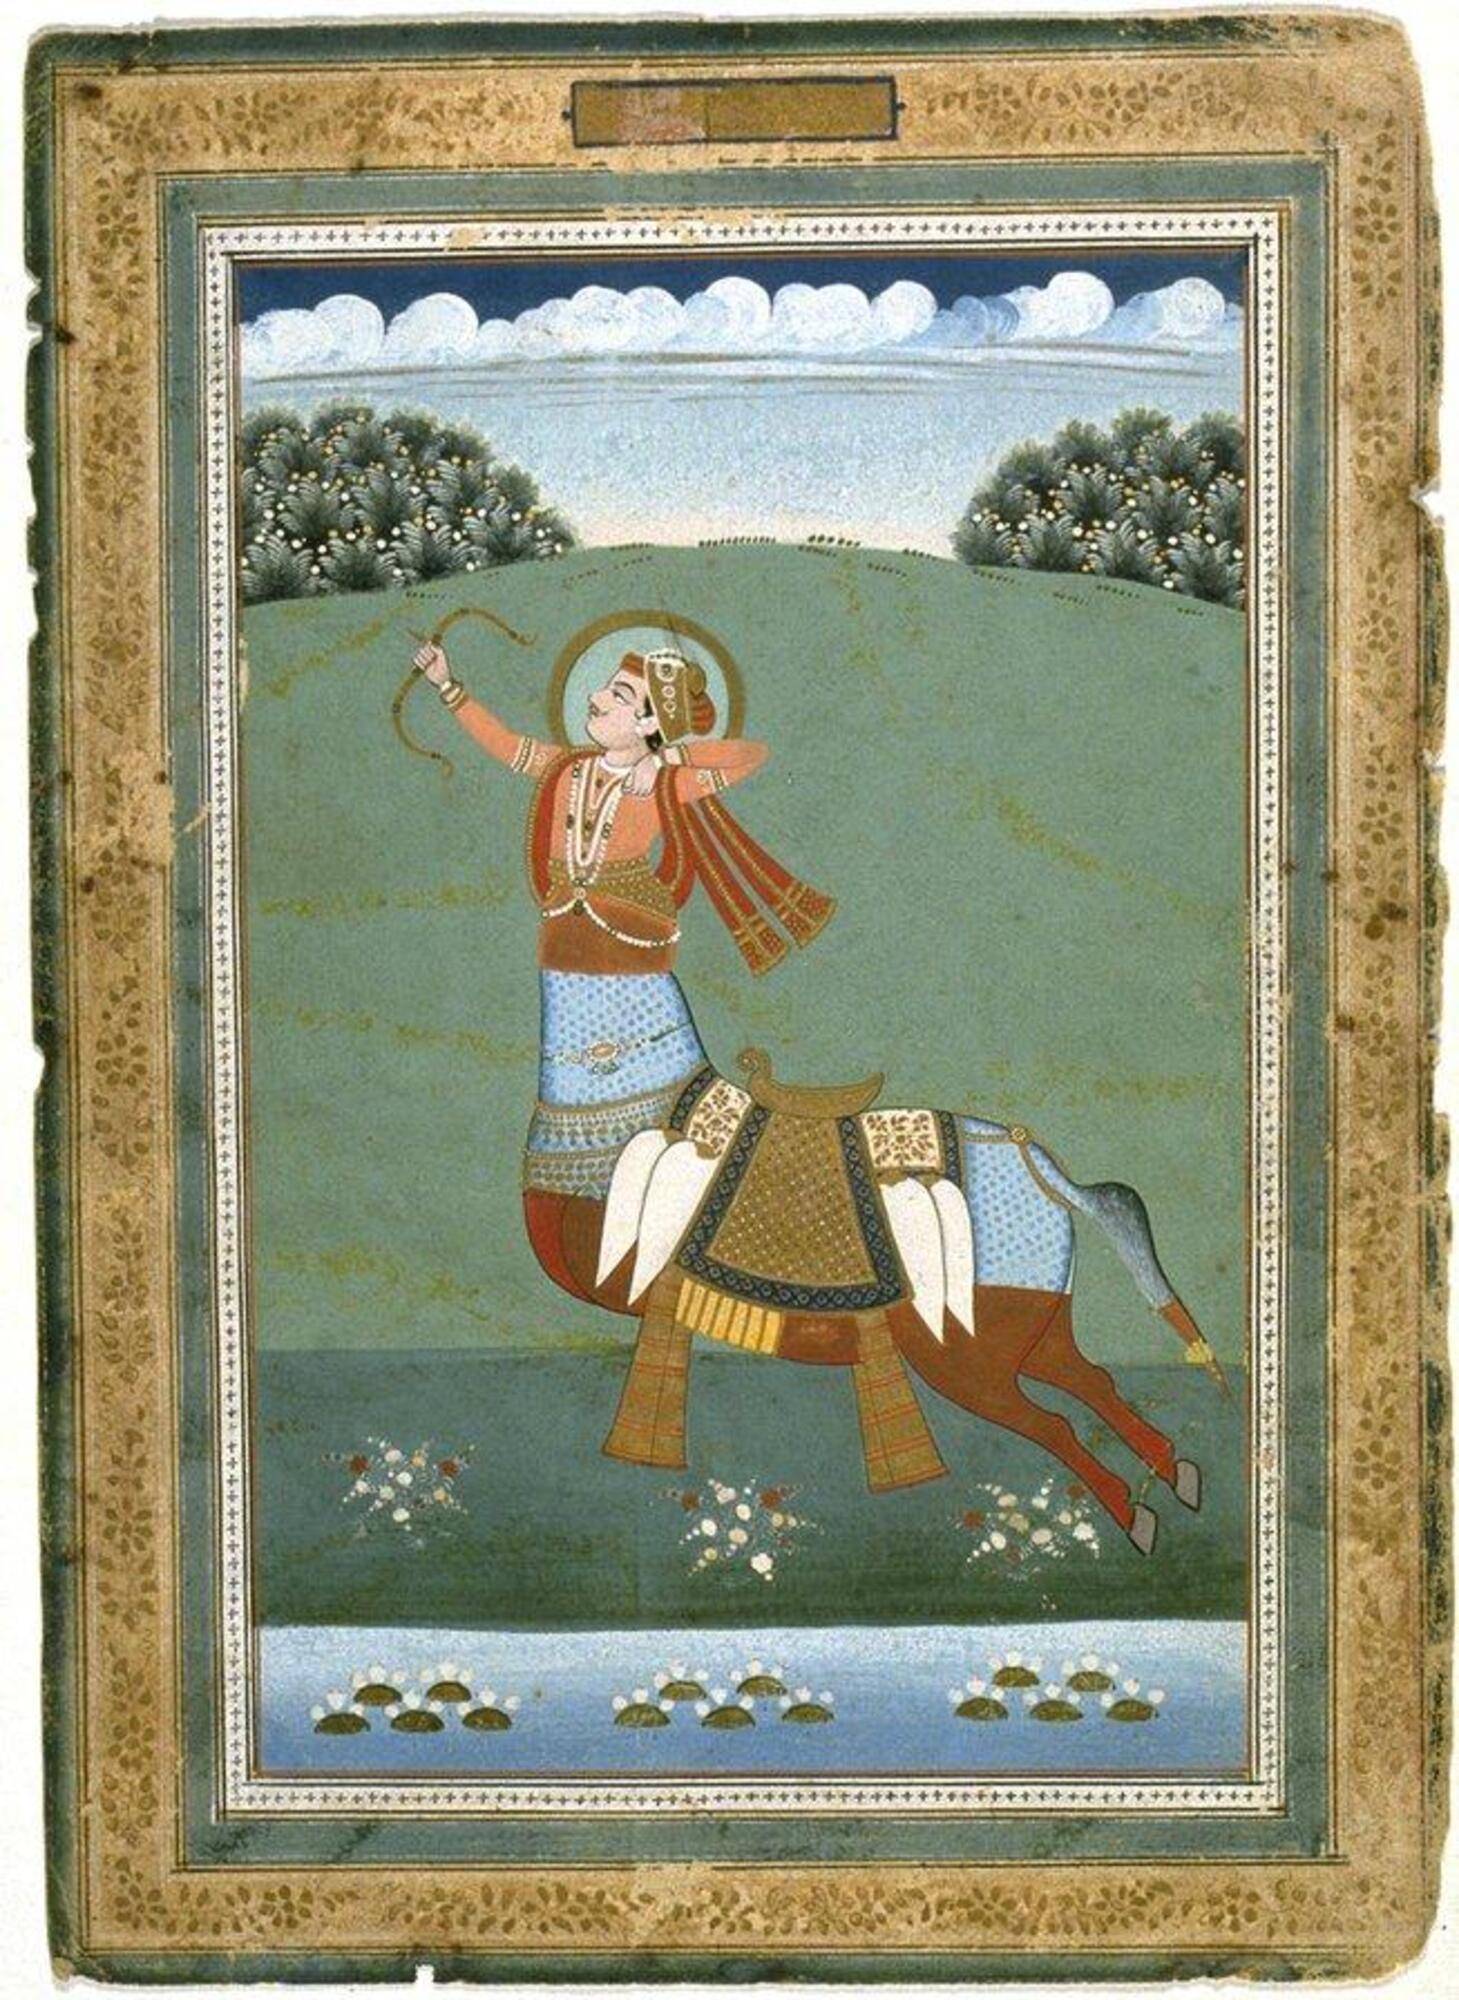 A centaur dominates the foreground of this image. This is a half man-half horse creature, framed by a green field and cloudy sky. He holds a bow and arrow in his hands. A water body runs below the centaur.